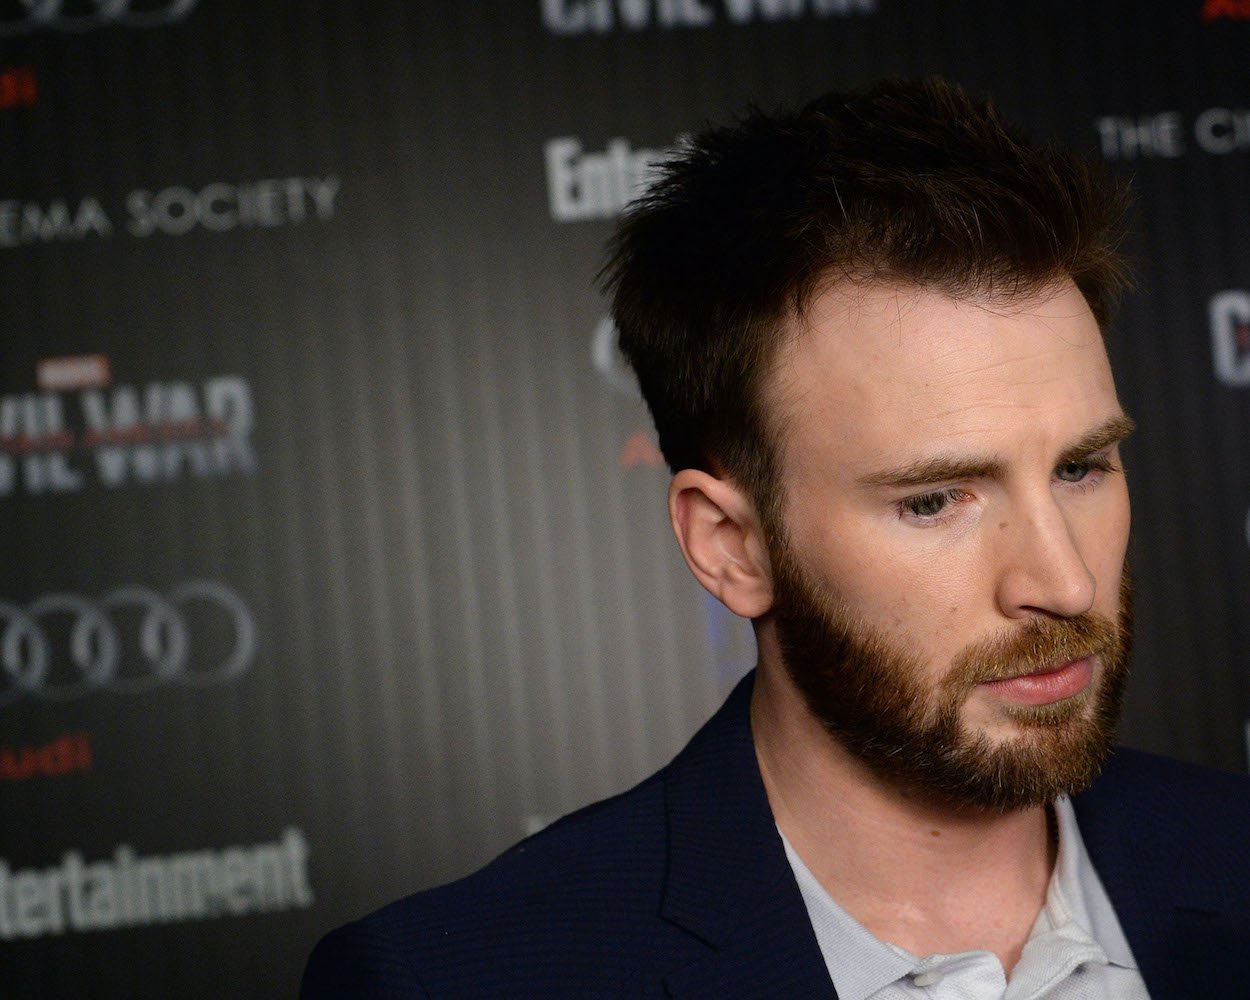 Chris Evans attends a screening of Marvel's 'Captain America: Civil War' in 2016, which was not one of the Evans movies with the worst opening weekends.